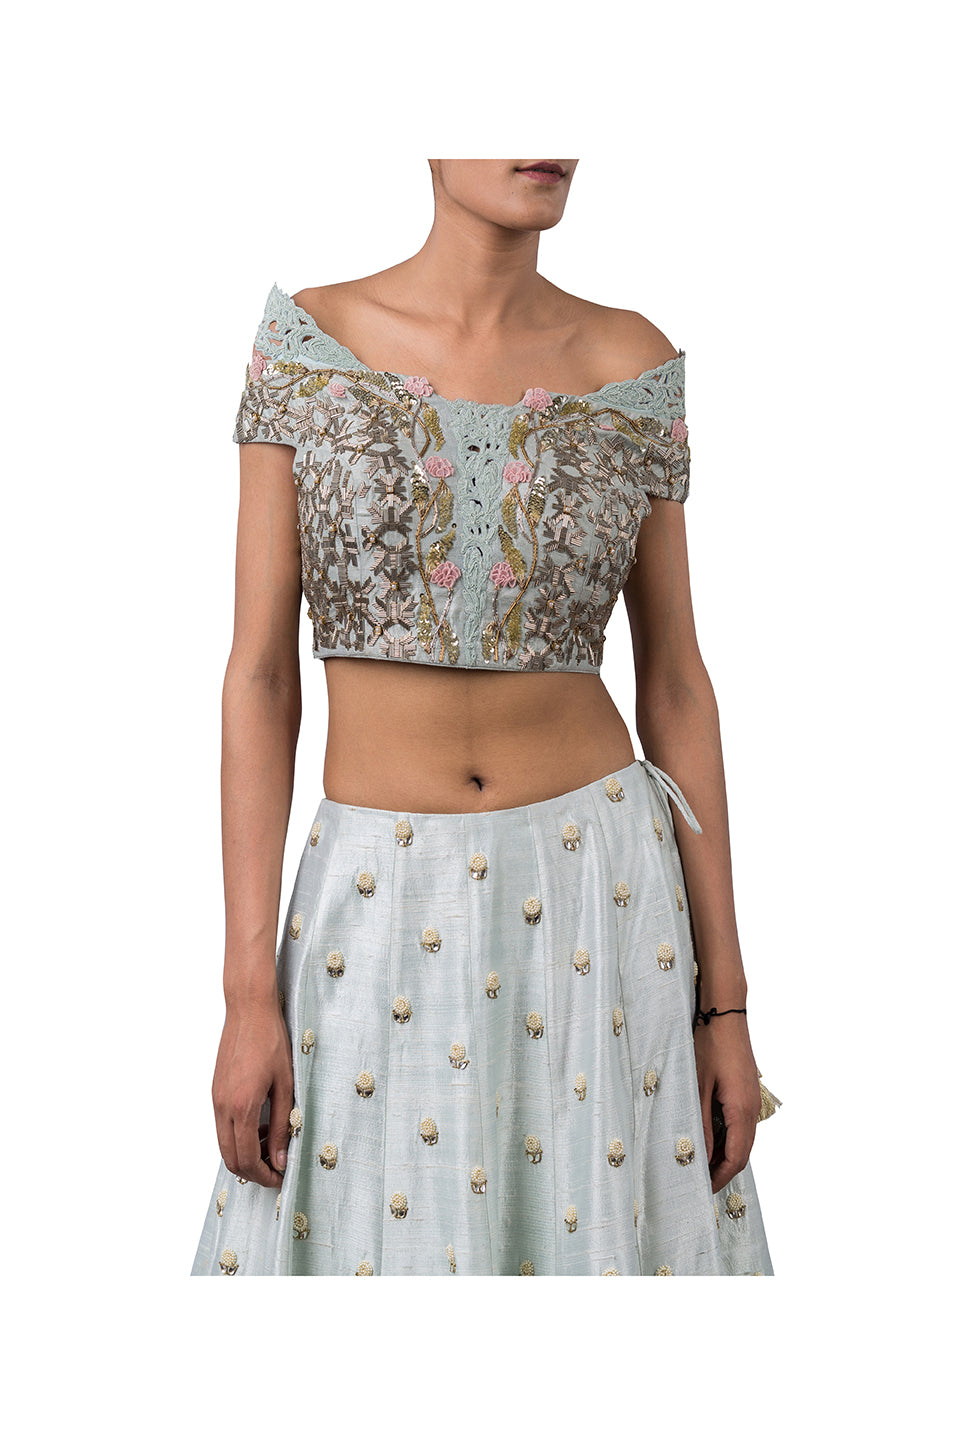 The Elusive Off-Shoulder Lehenga for the Glamorous Bride-To-Be